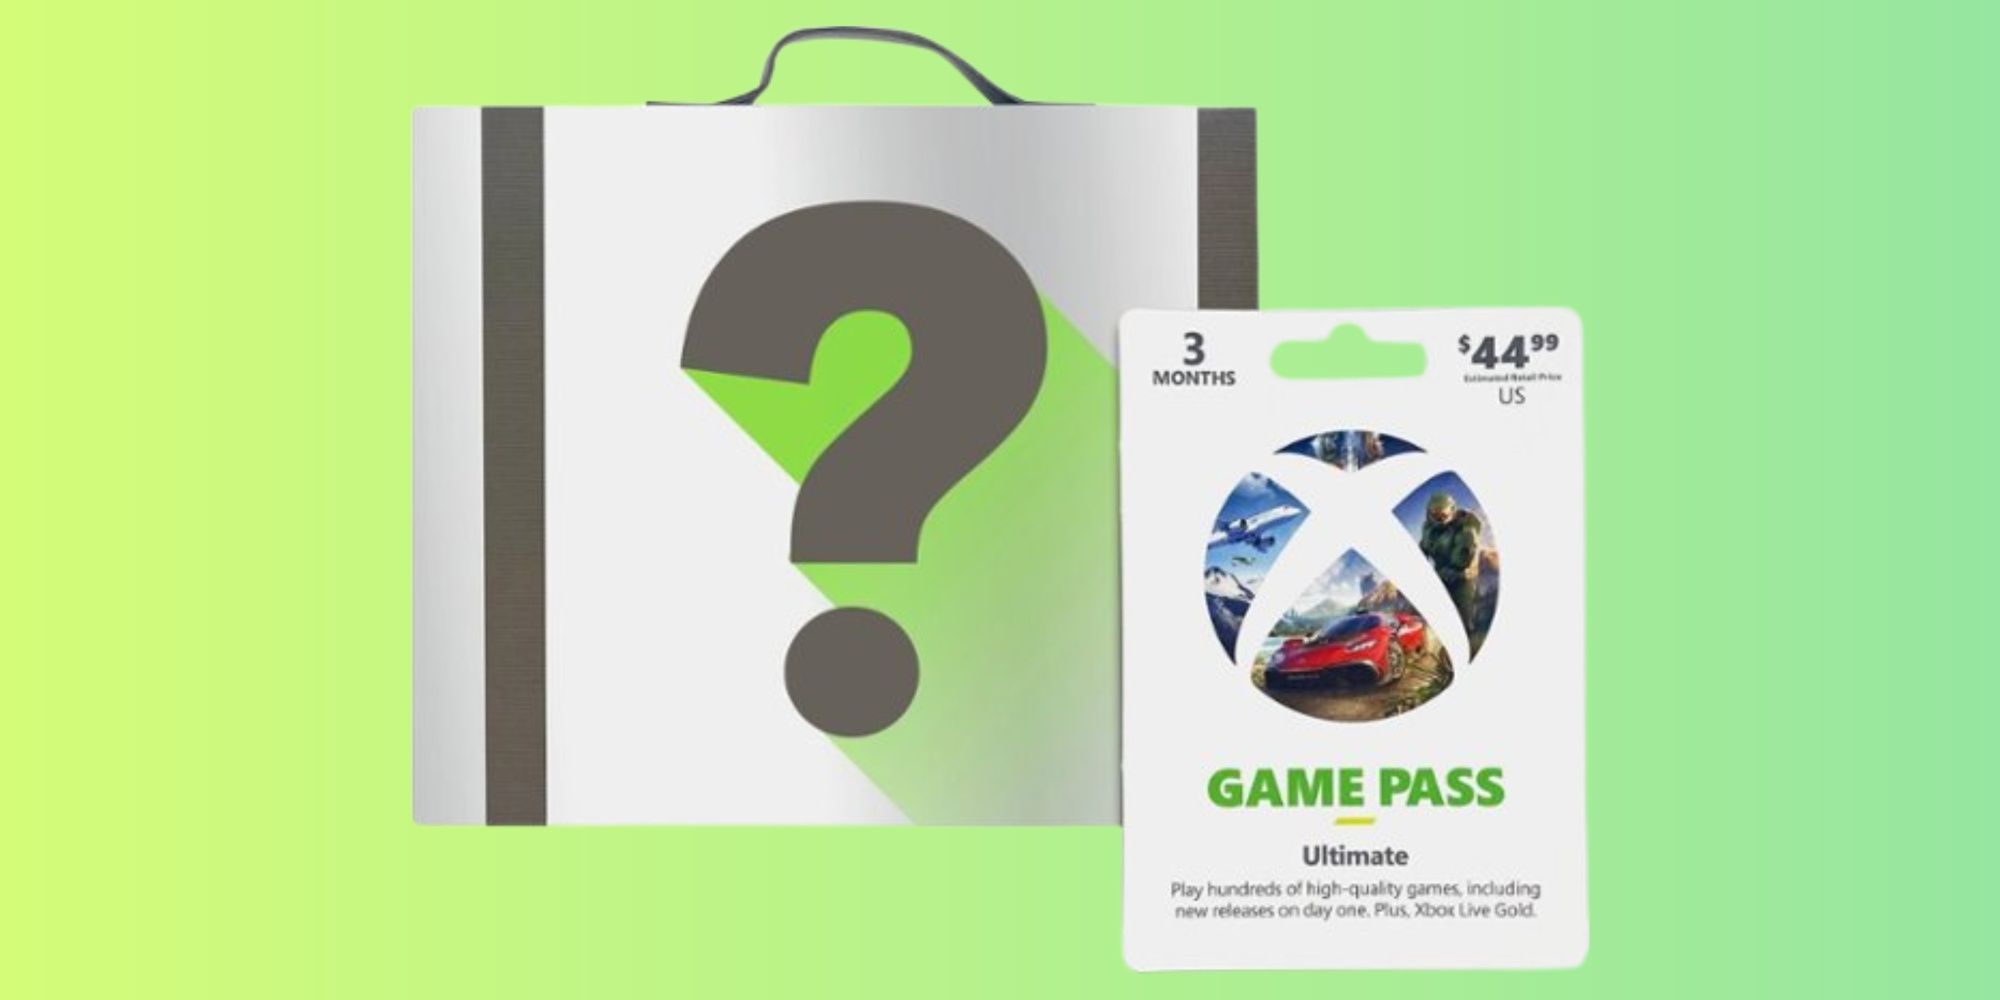 A bag with a question mark and a three-month pass of Xbox Game Pass Ultimate